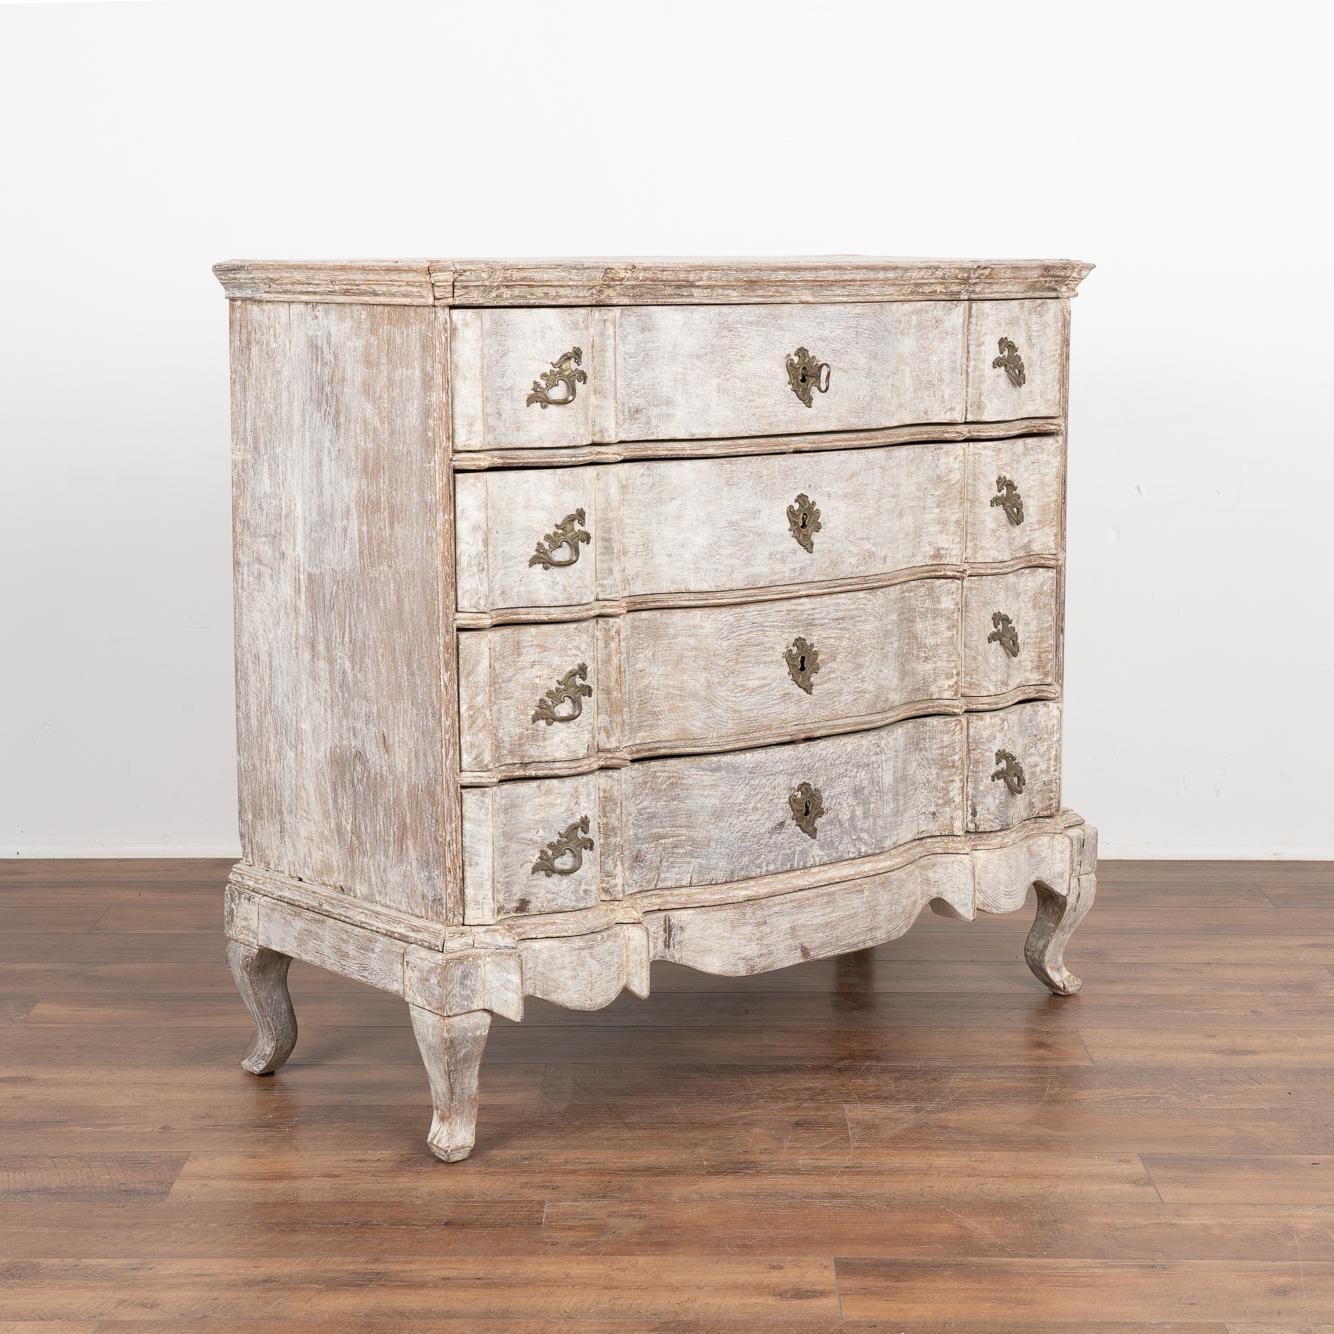 This large antique rococo chest of four drawers features a serpentine front, brass hardware pulls and rests on cabriolet feet.
It has been given an exceptional new professional gray layered painted finish with white undertones. It has been lightly